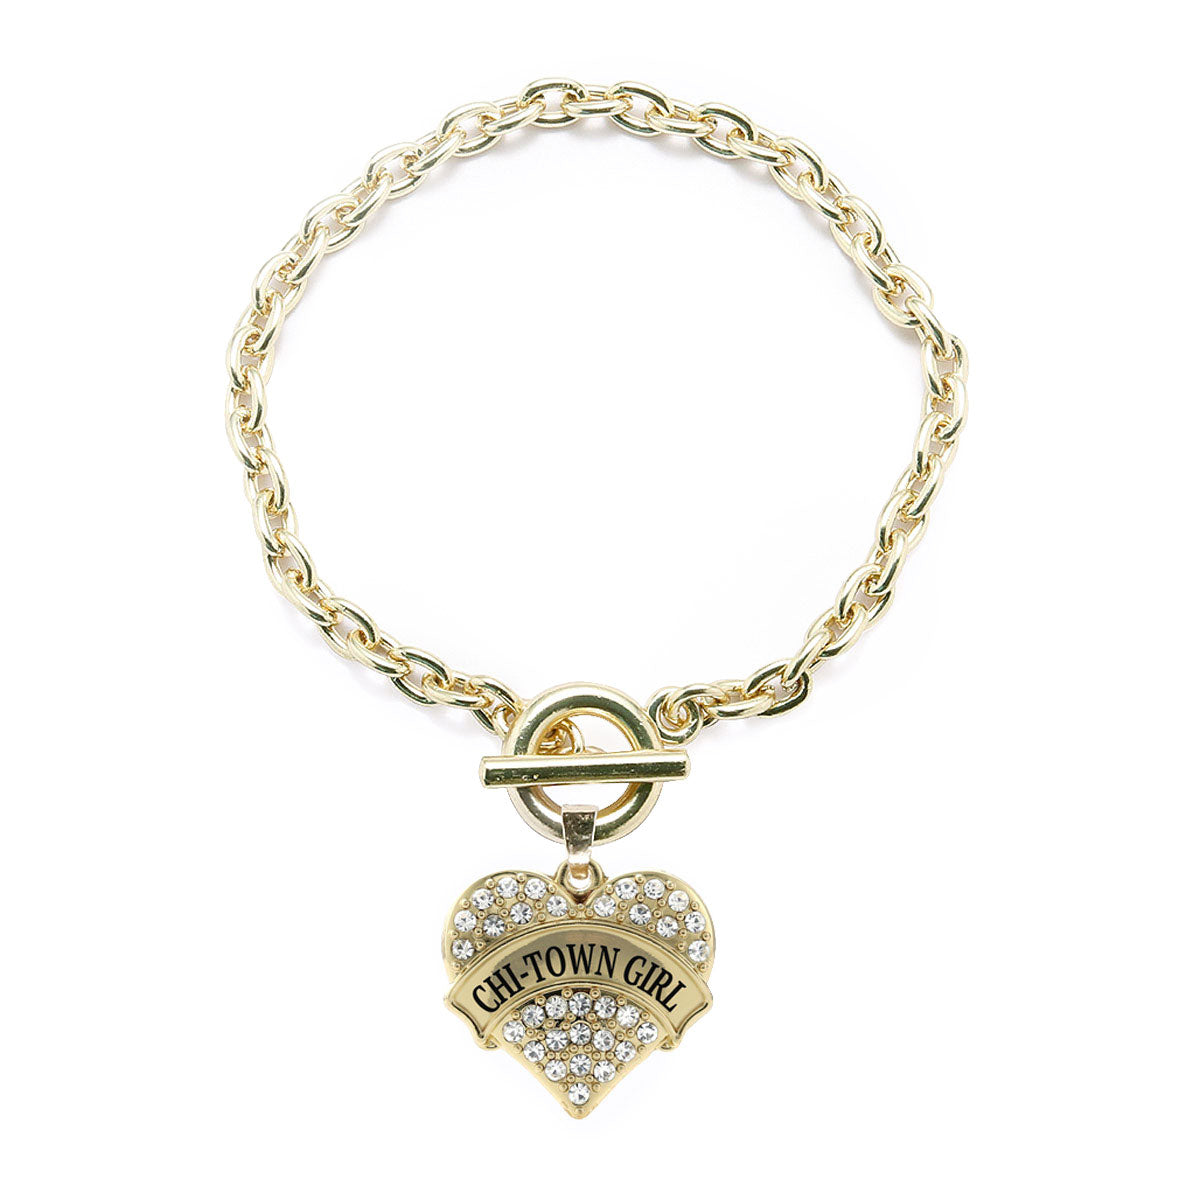 Gold Chi-Town Girl Pave Heart Charm Toggle Bracelet